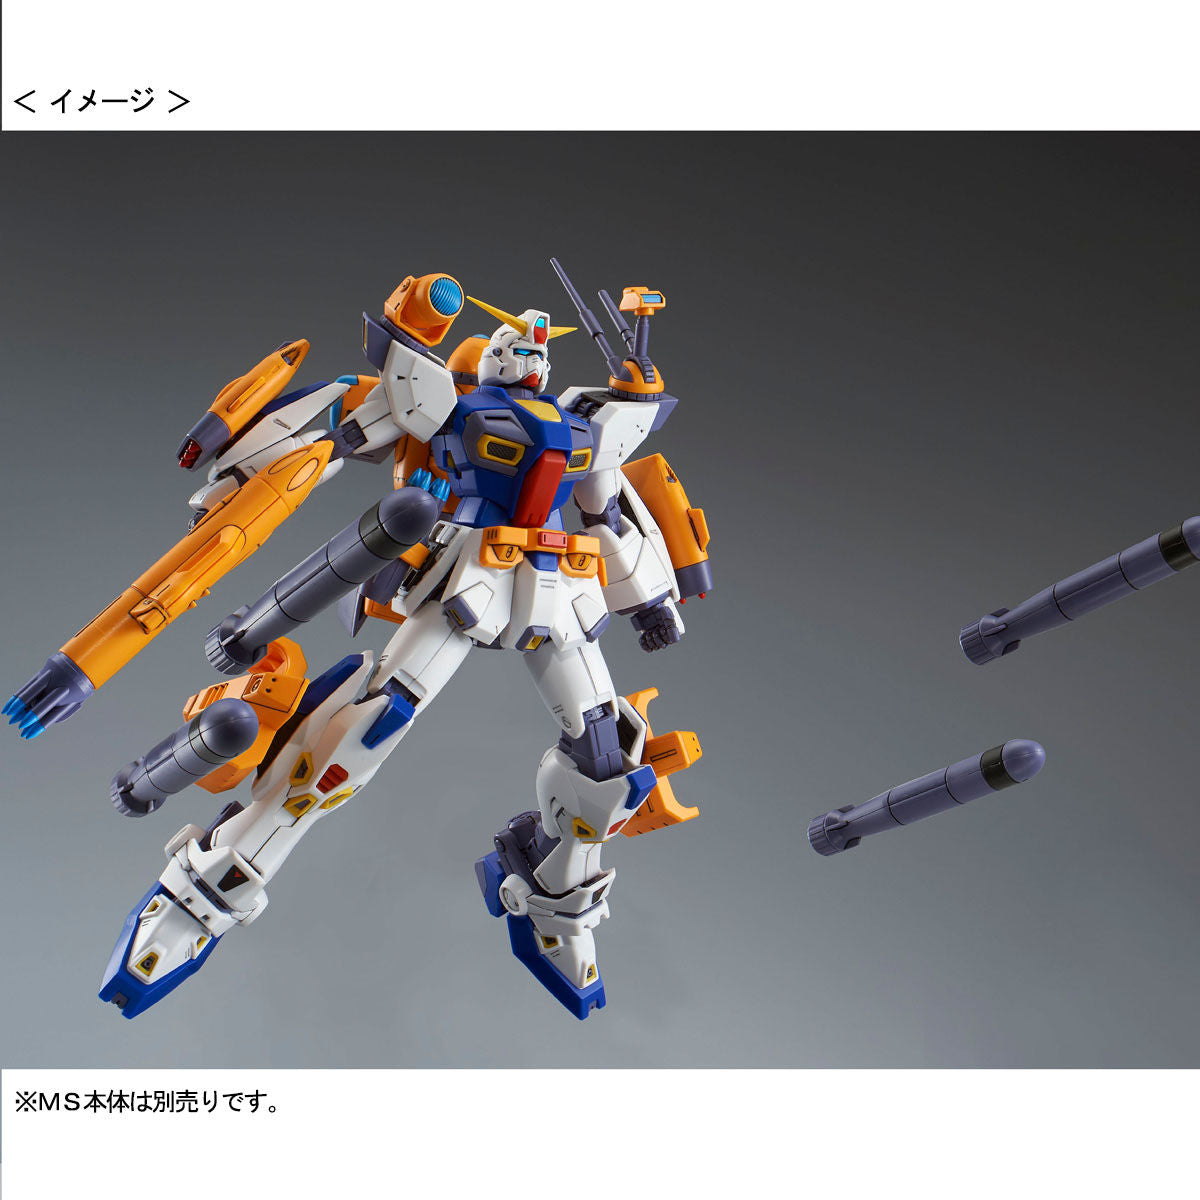 P-BANDAI: MG 1/100 GUNDAM F90 MISSION PACK F TYPE AND M TYPE EQUIPMENT SET *PARTS ONLY*